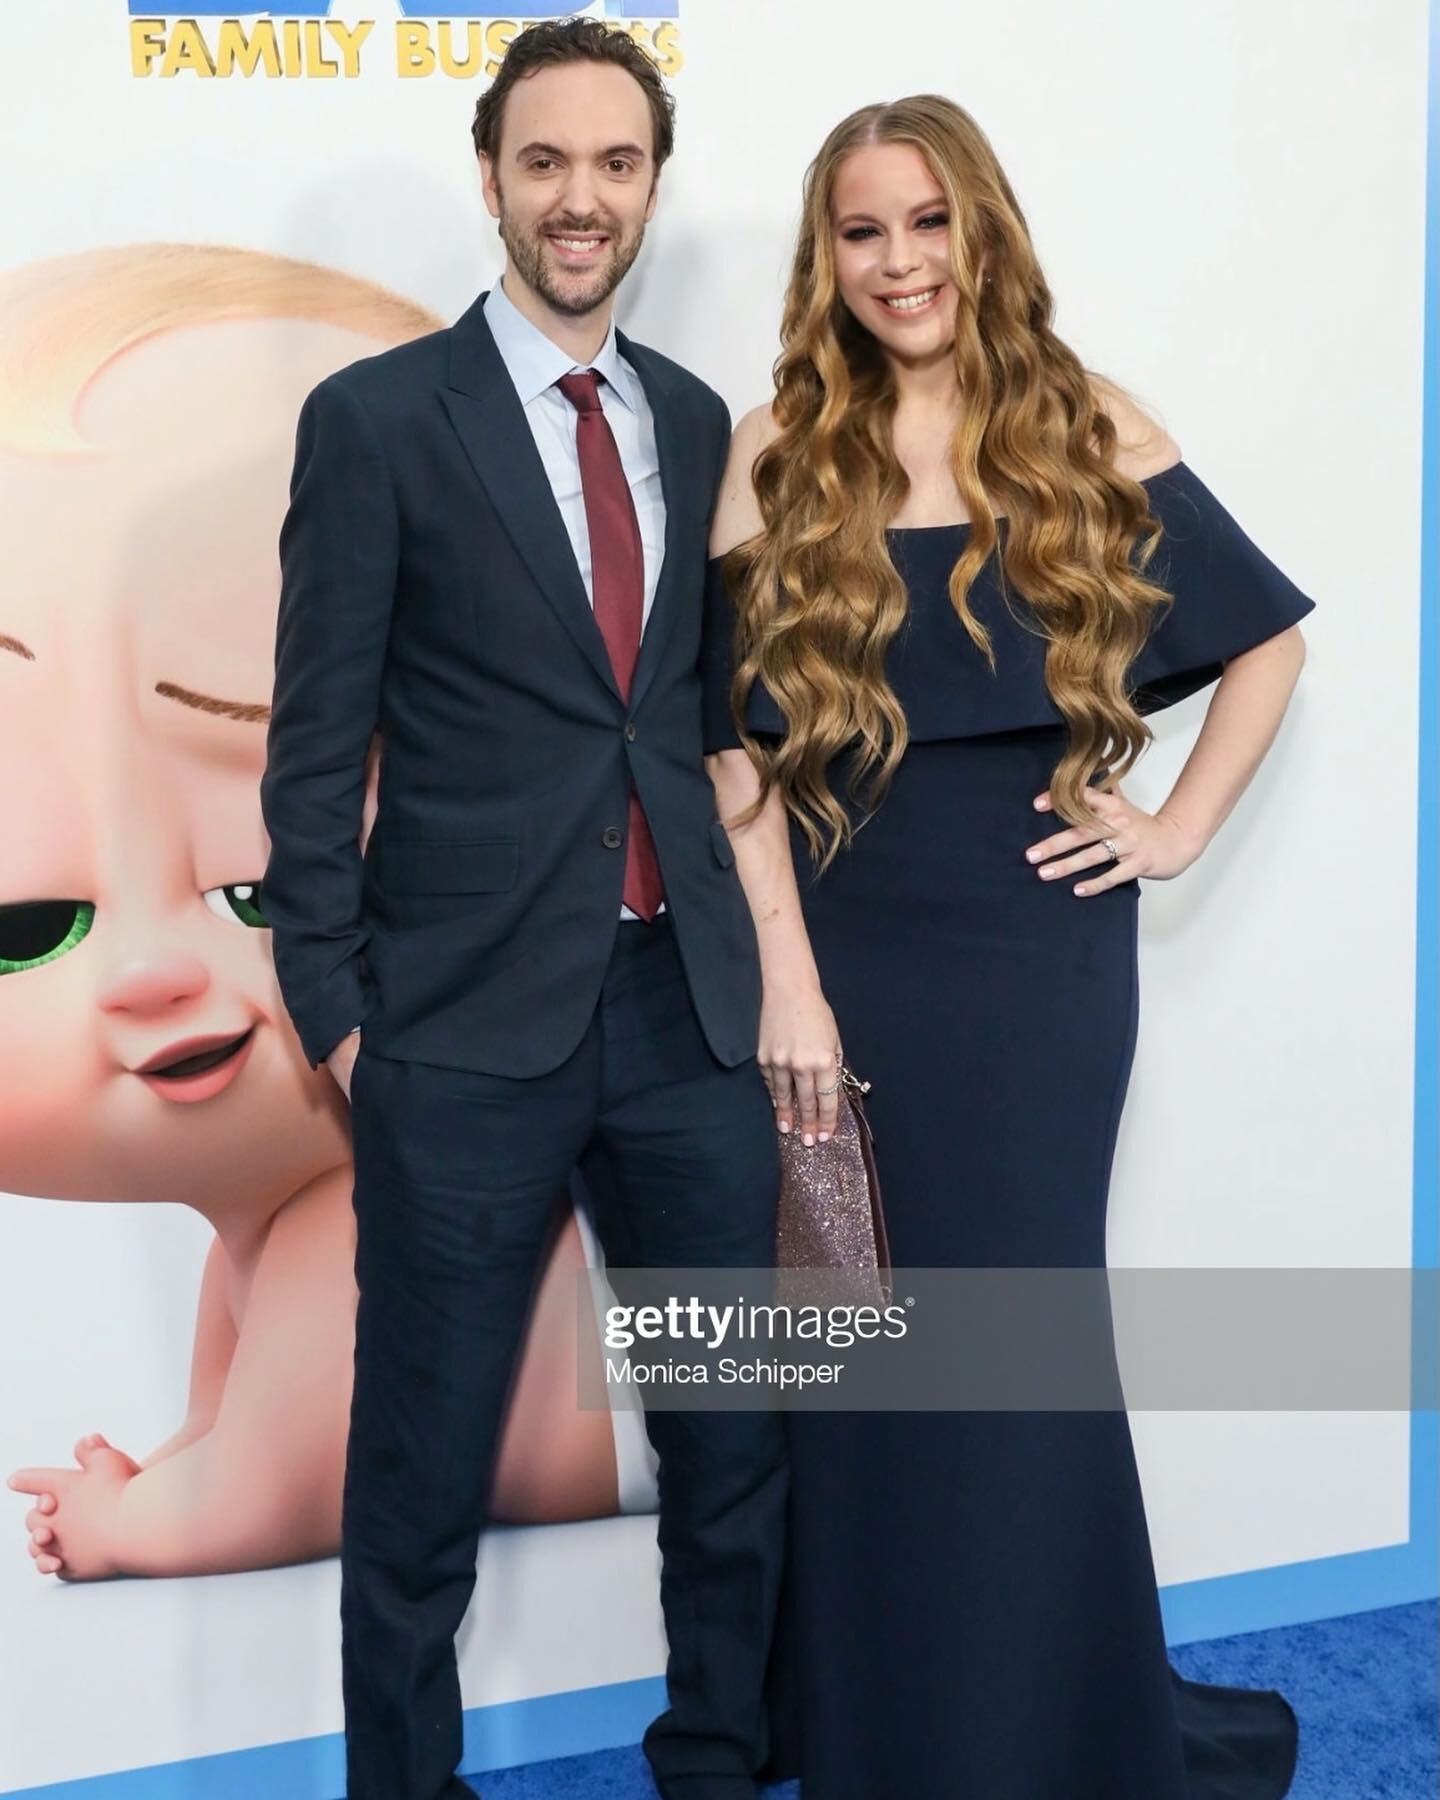 Last night was so magical.. being able to work creatively with the love of my life and then seeing it all come together is a joy I can&rsquo;t put into words. I&rsquo;m so proud of @steve_mazzaro, the incredible score for @bossbaby 2, and the entire 